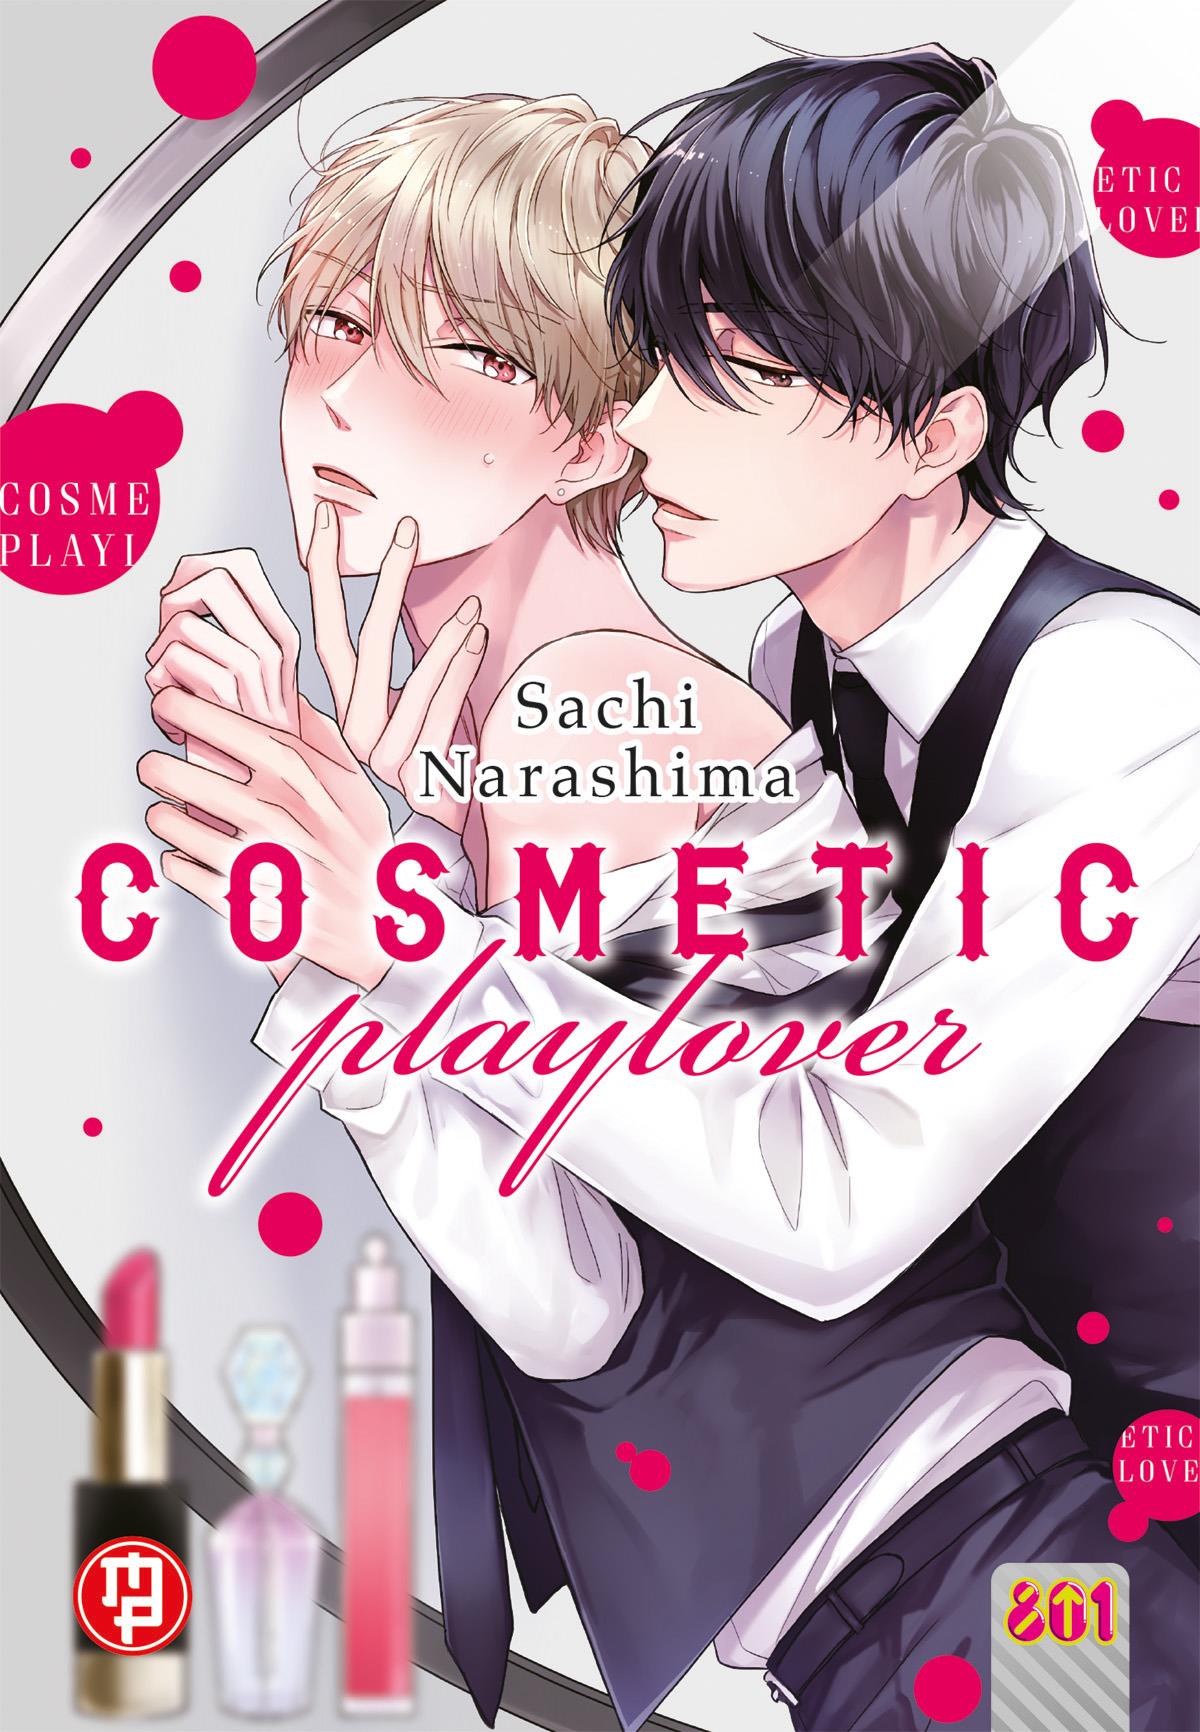 COSMETIC PLAYLOVER #001